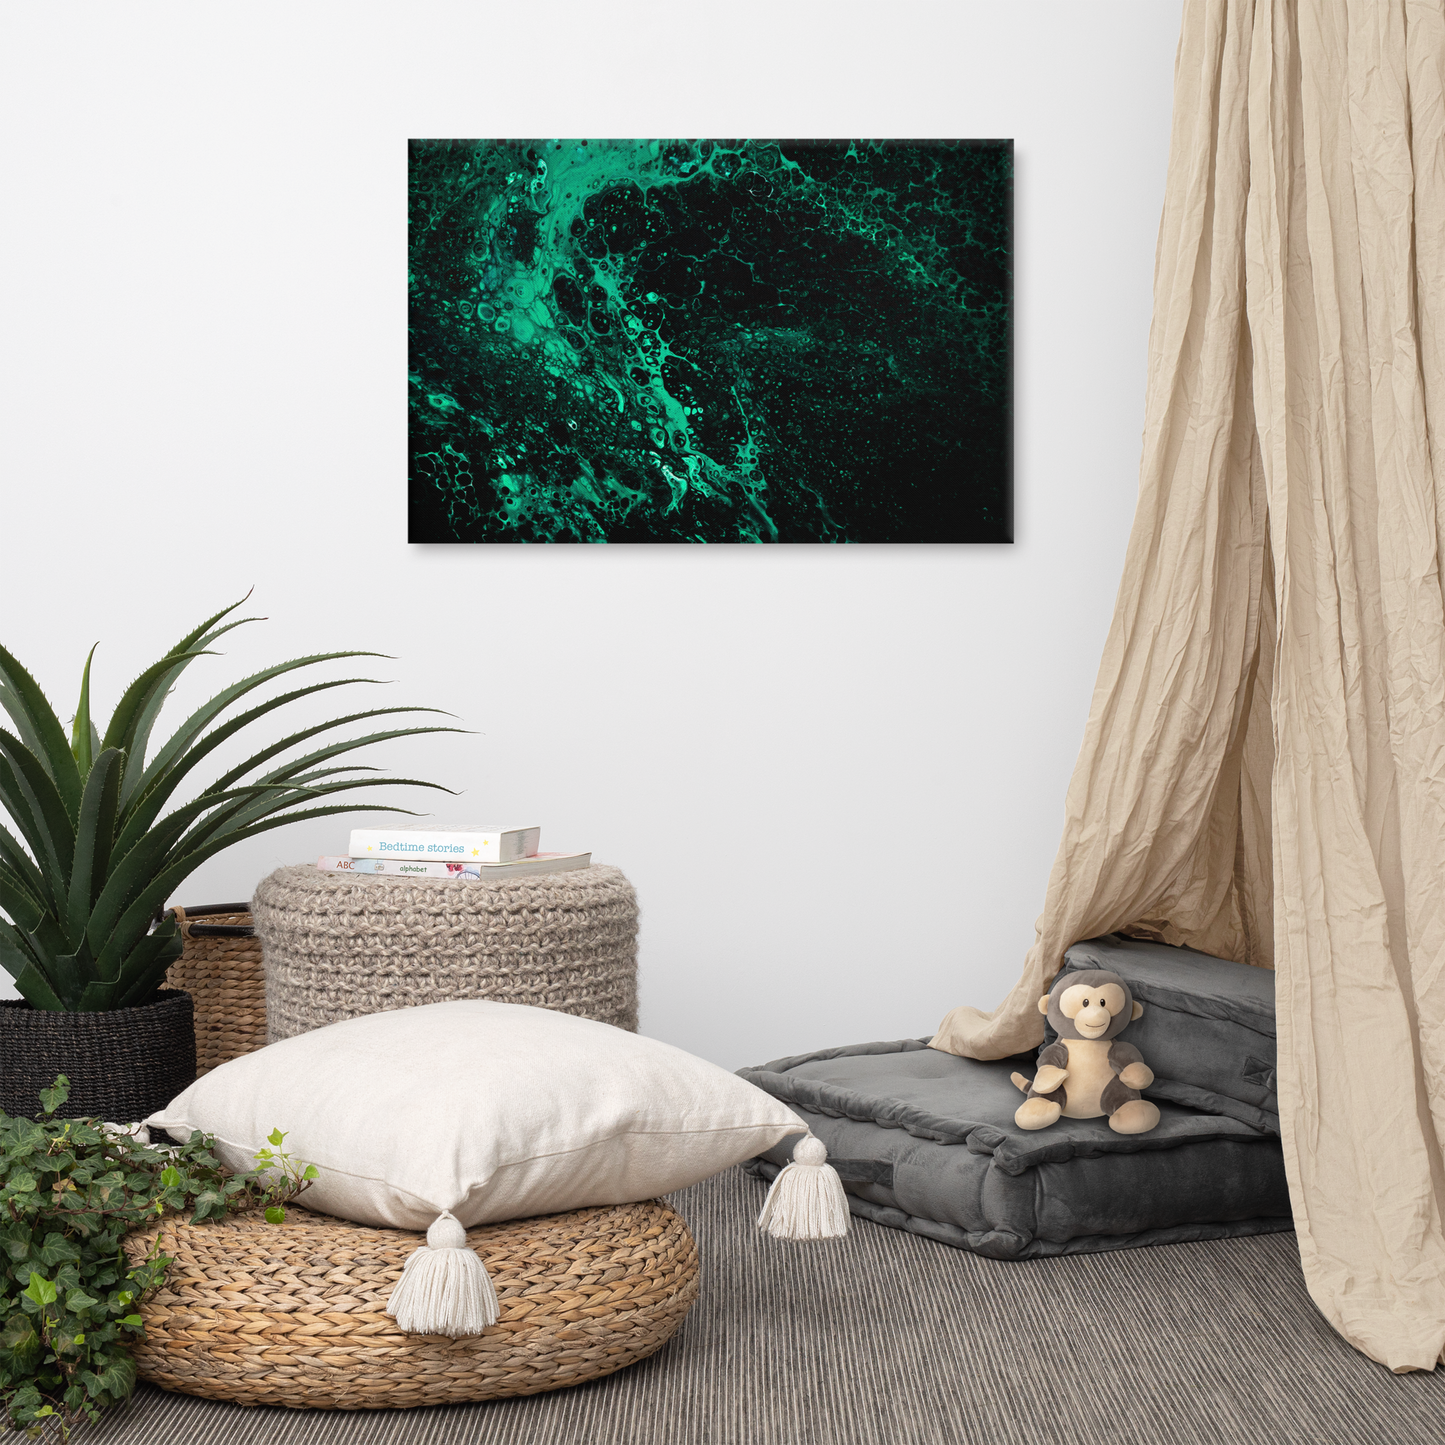 NightOwl Studio Abstract Wall Art, Green Tide, Boho Living Room, Bedroom, Office, and Home Decor, Premium Canvas with Wooden Frame, Acrylic Painting Reproduction, 24” x 36”